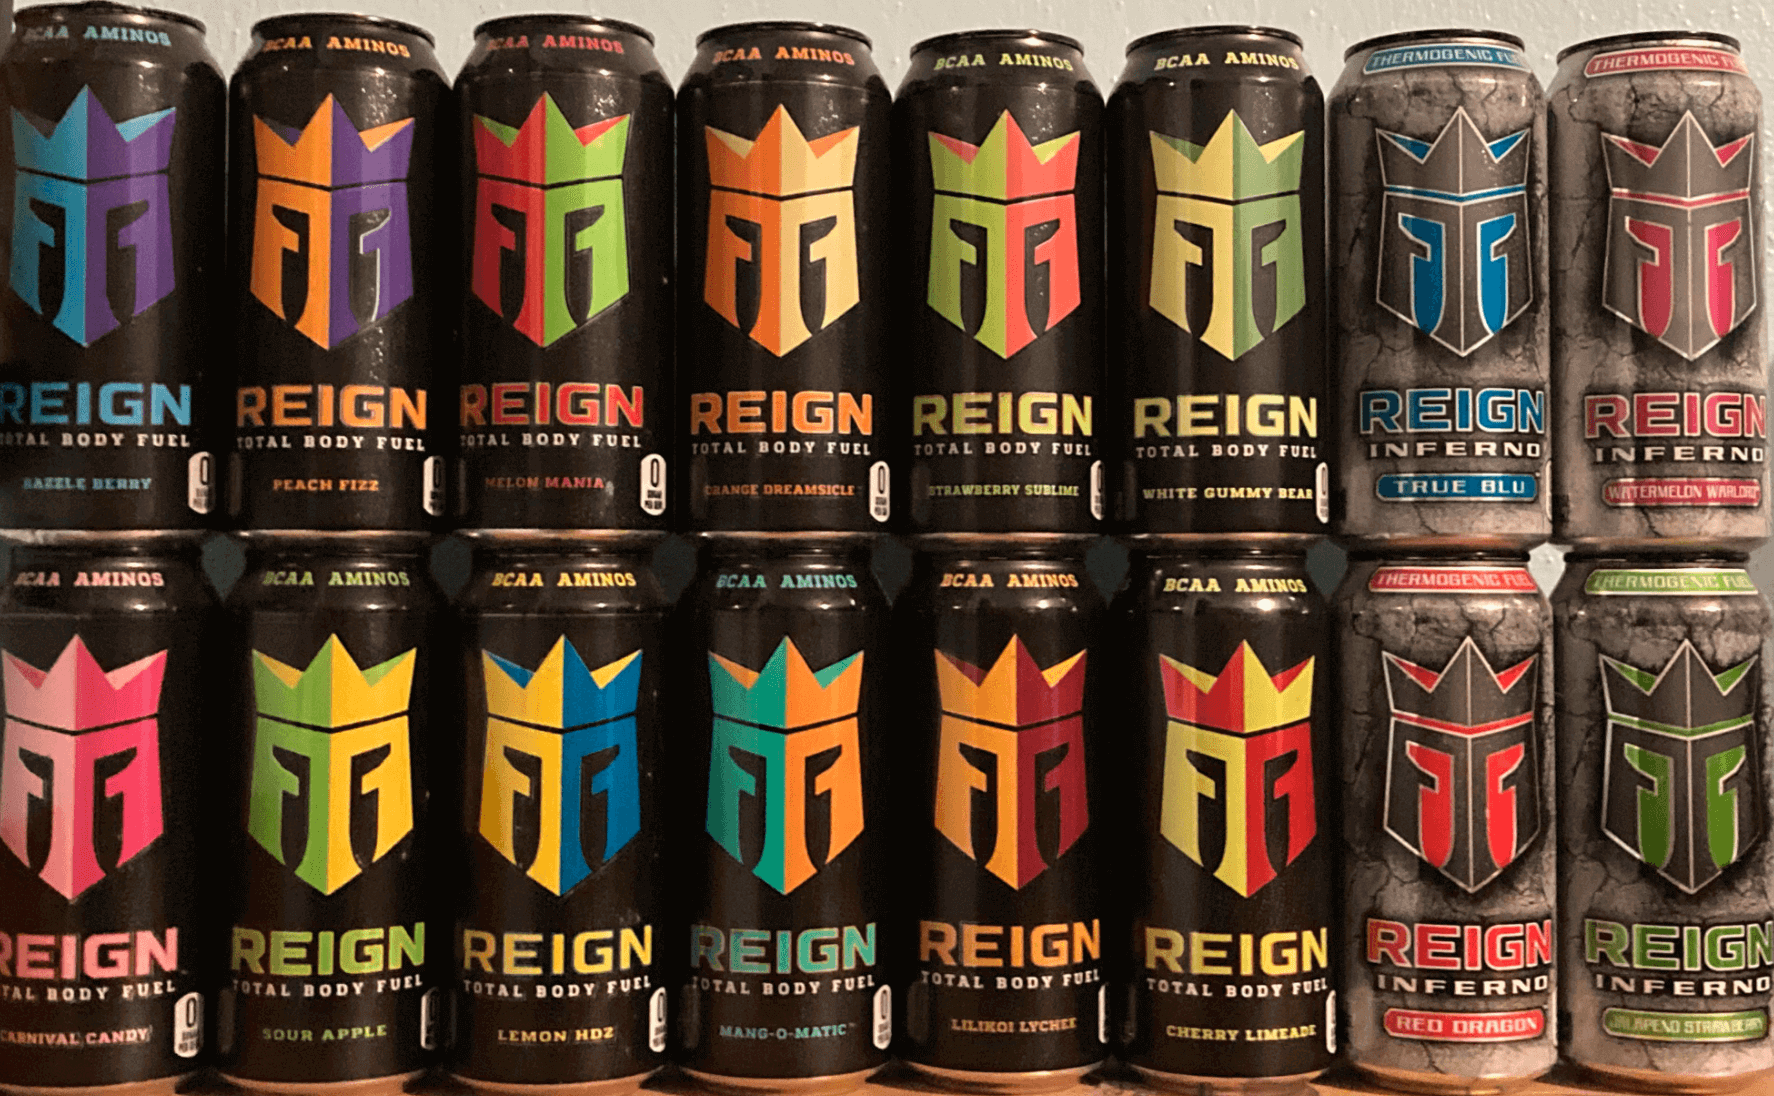 Is Reign Energy Drink Healthy? (Facts)